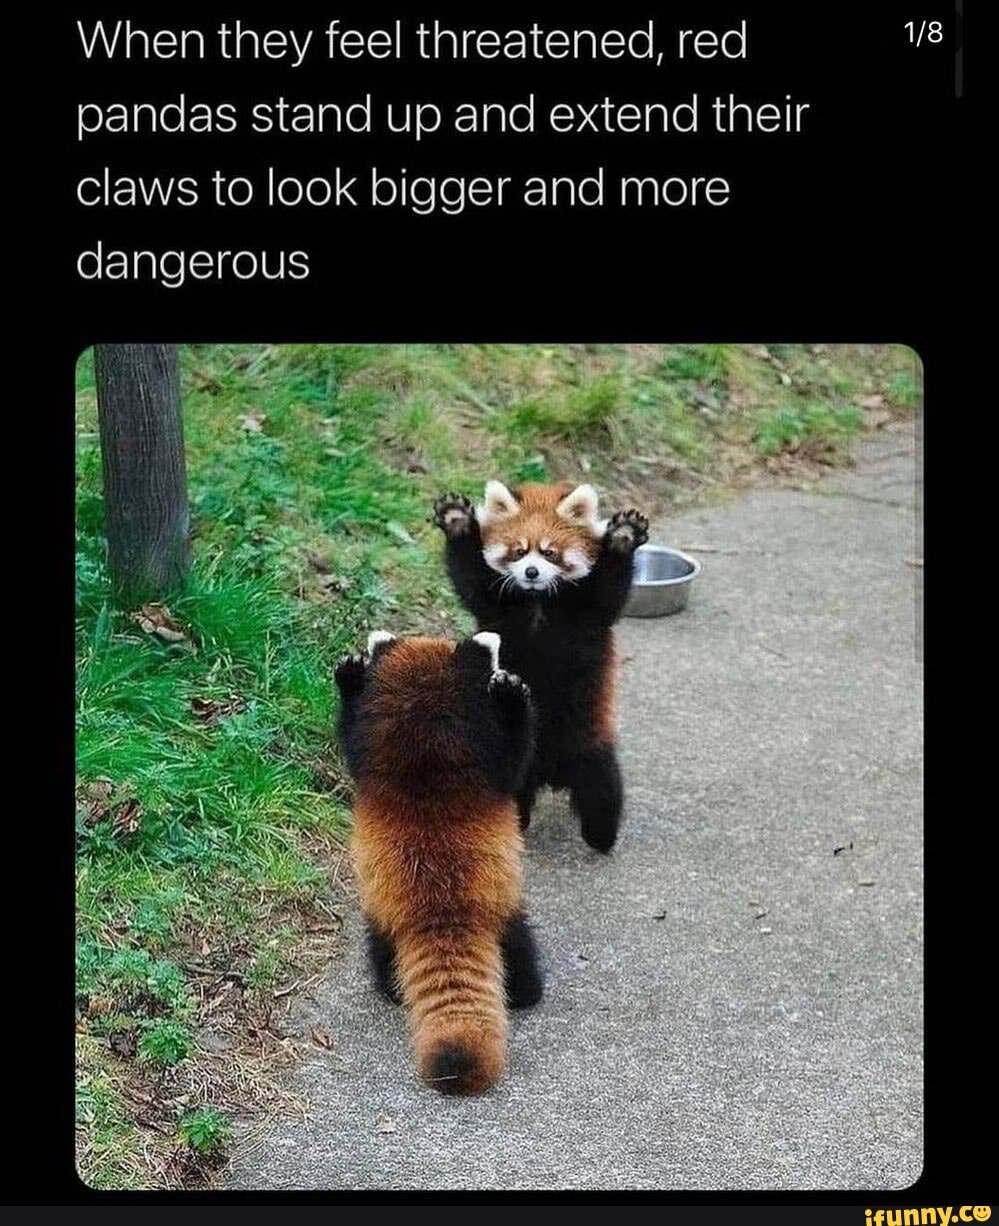 When they threatened, red pandas stand up and their claws look bigger more dangerous - iFunny Brazil